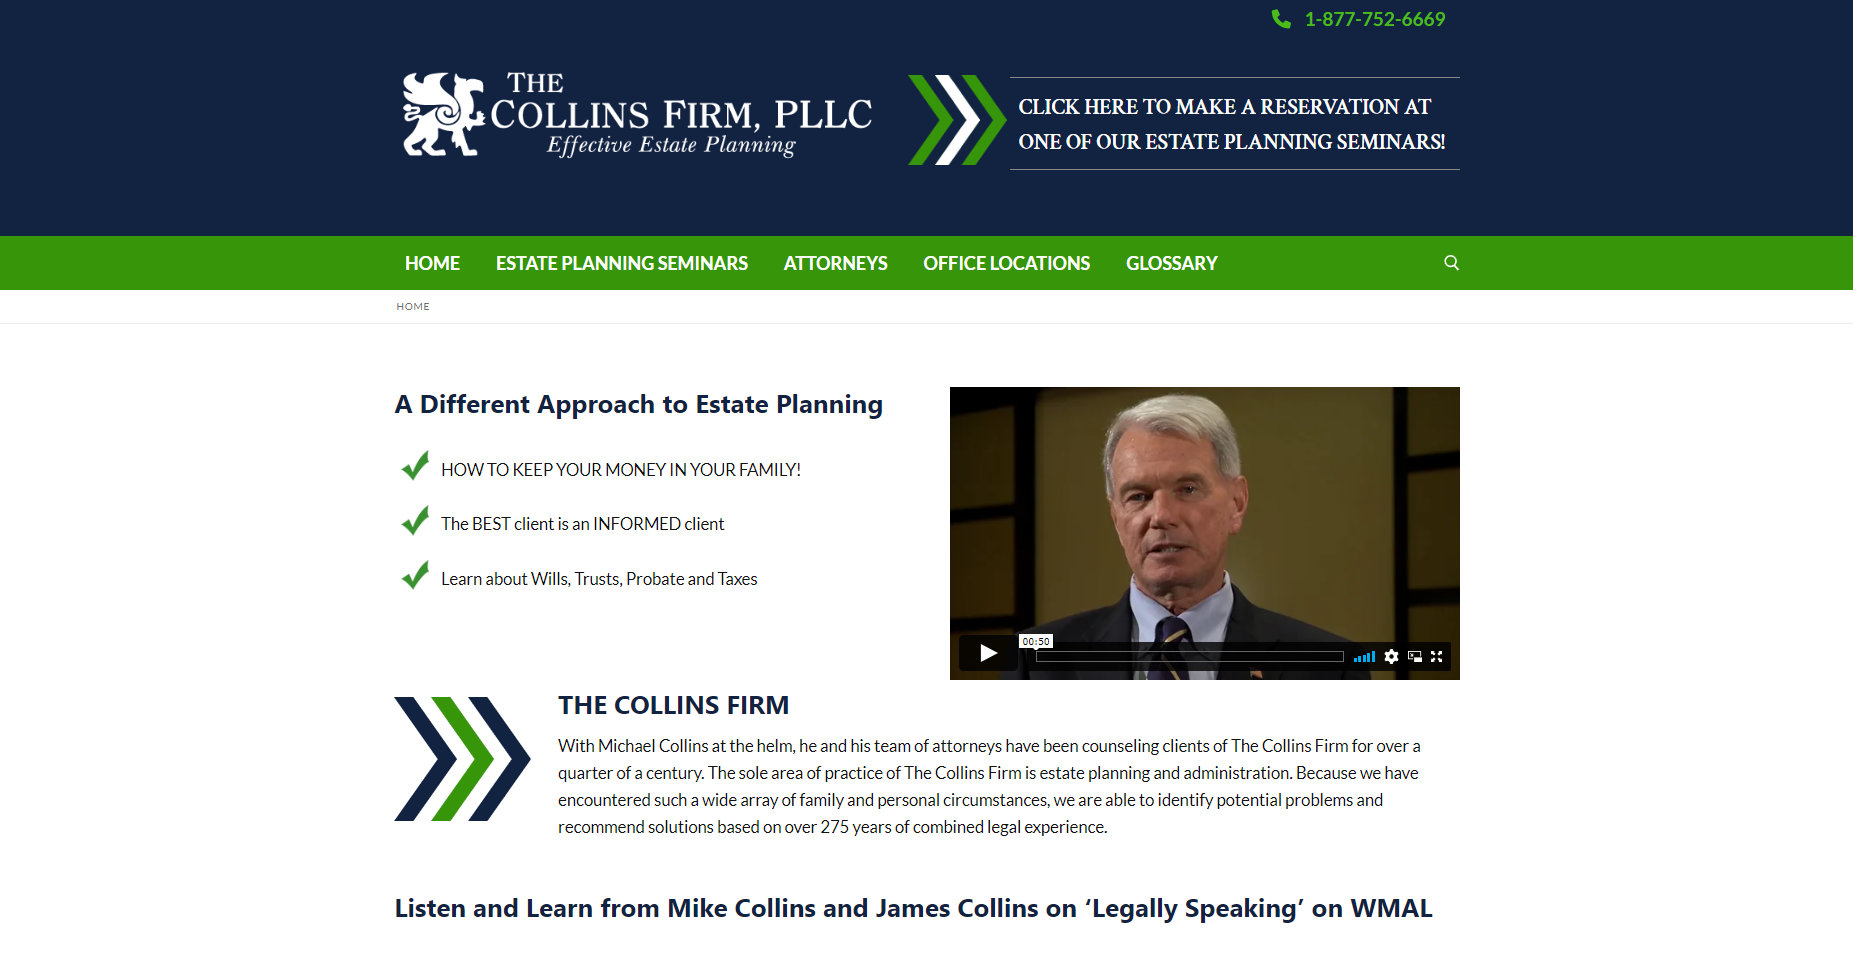 The Collins Firm - Website design, development, build, maintenance, and hosting by Talk19 Media & Marketing company in Warrenton, Fauquier County, Northern Virginia